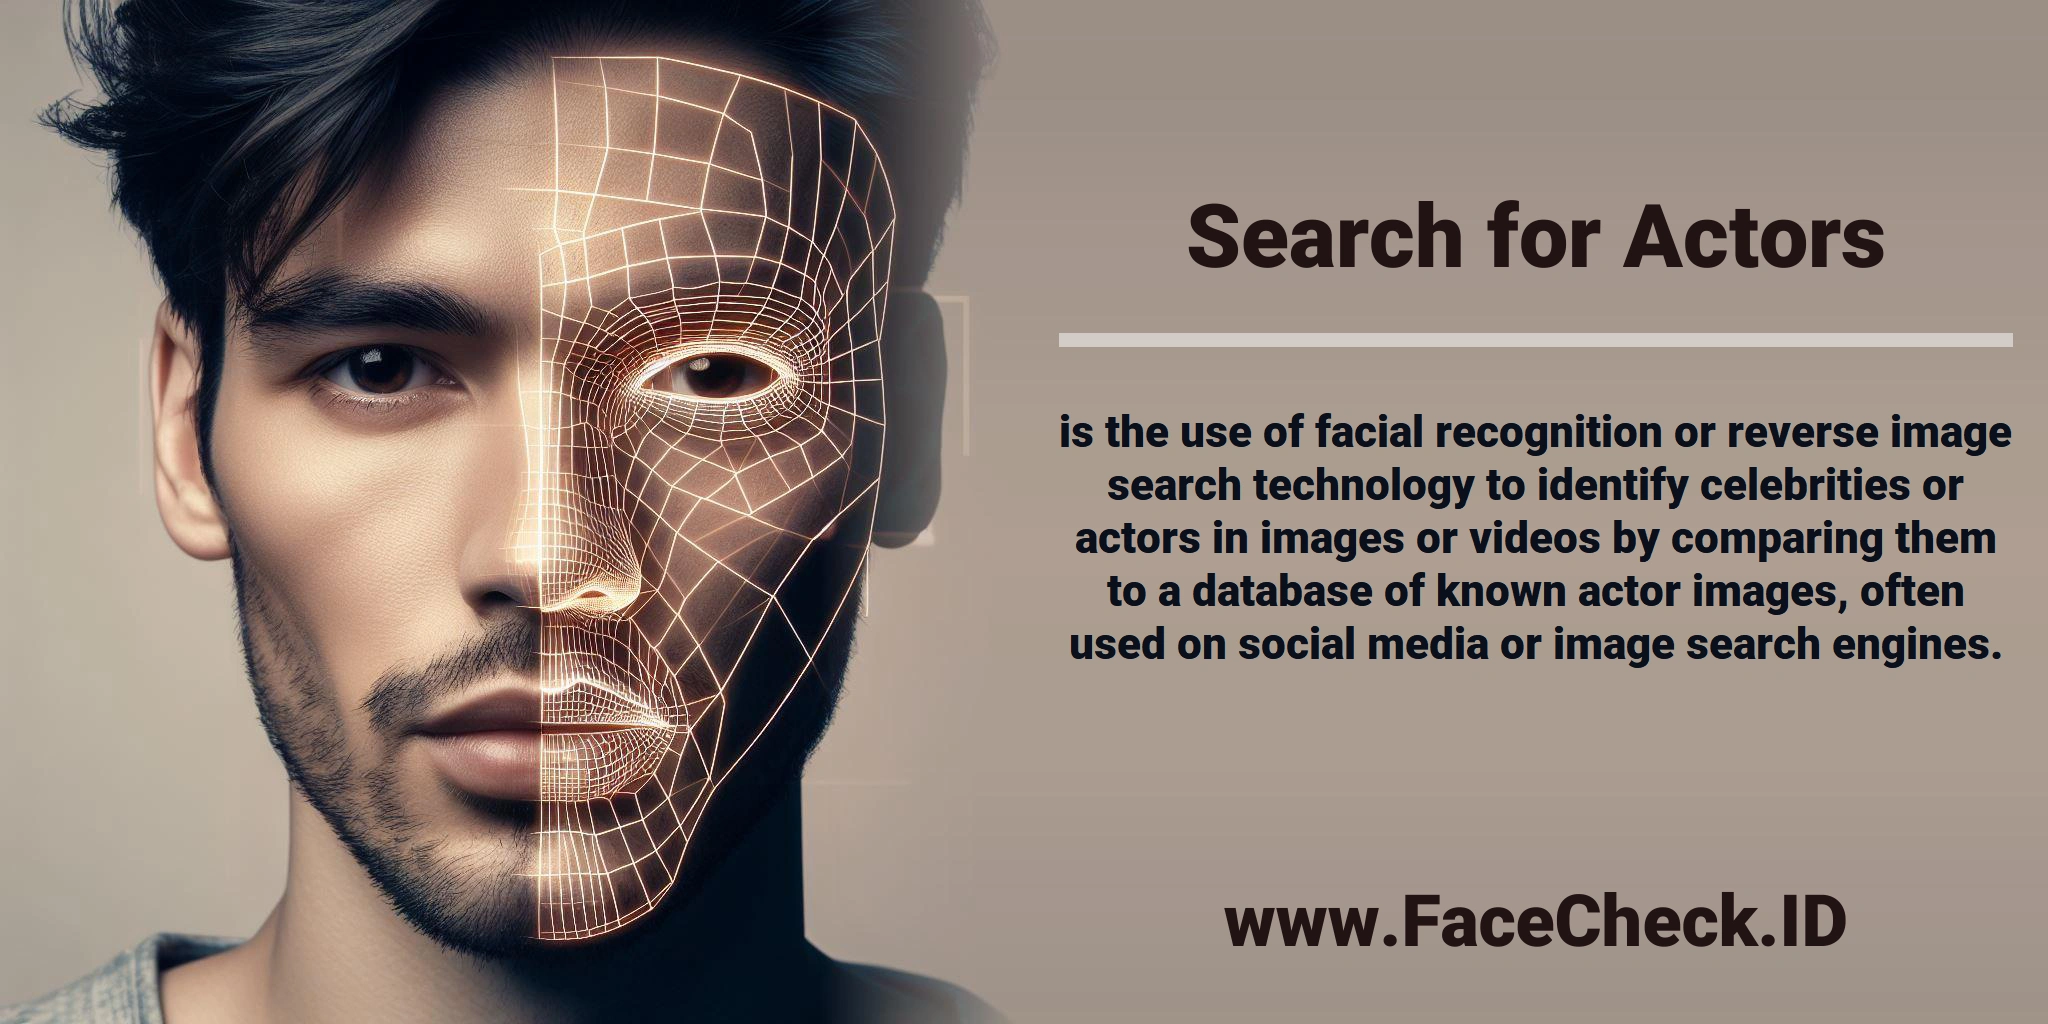 <b>Search for Actors</b> is the use of facial recognition or reverse image search technology to identify celebrities or actors in images or videos by comparing them to a database of known actor images, often used on social media or image search engines.